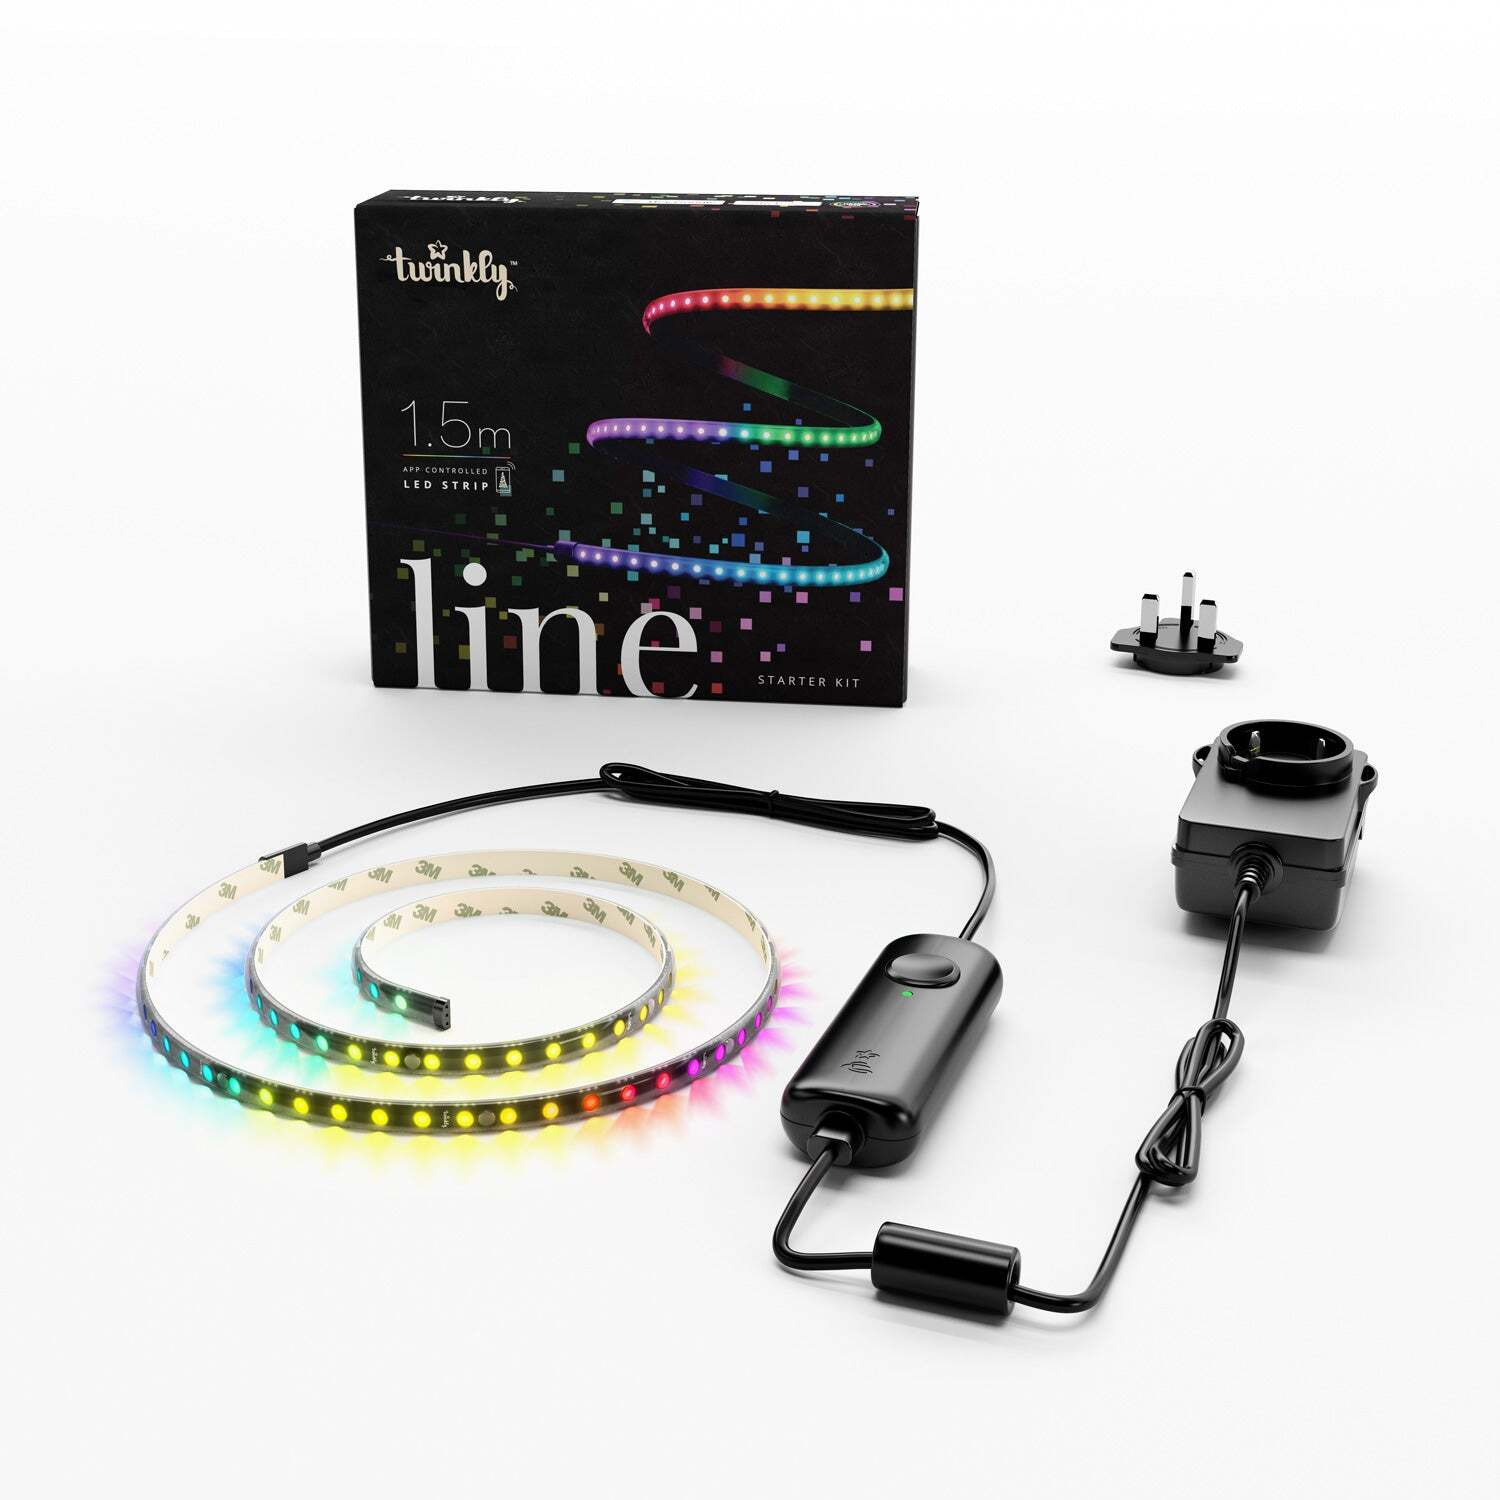 1.5m 90 LED Twinkly Line Smart App Controlled Strip Light Multi Coloured - image 1